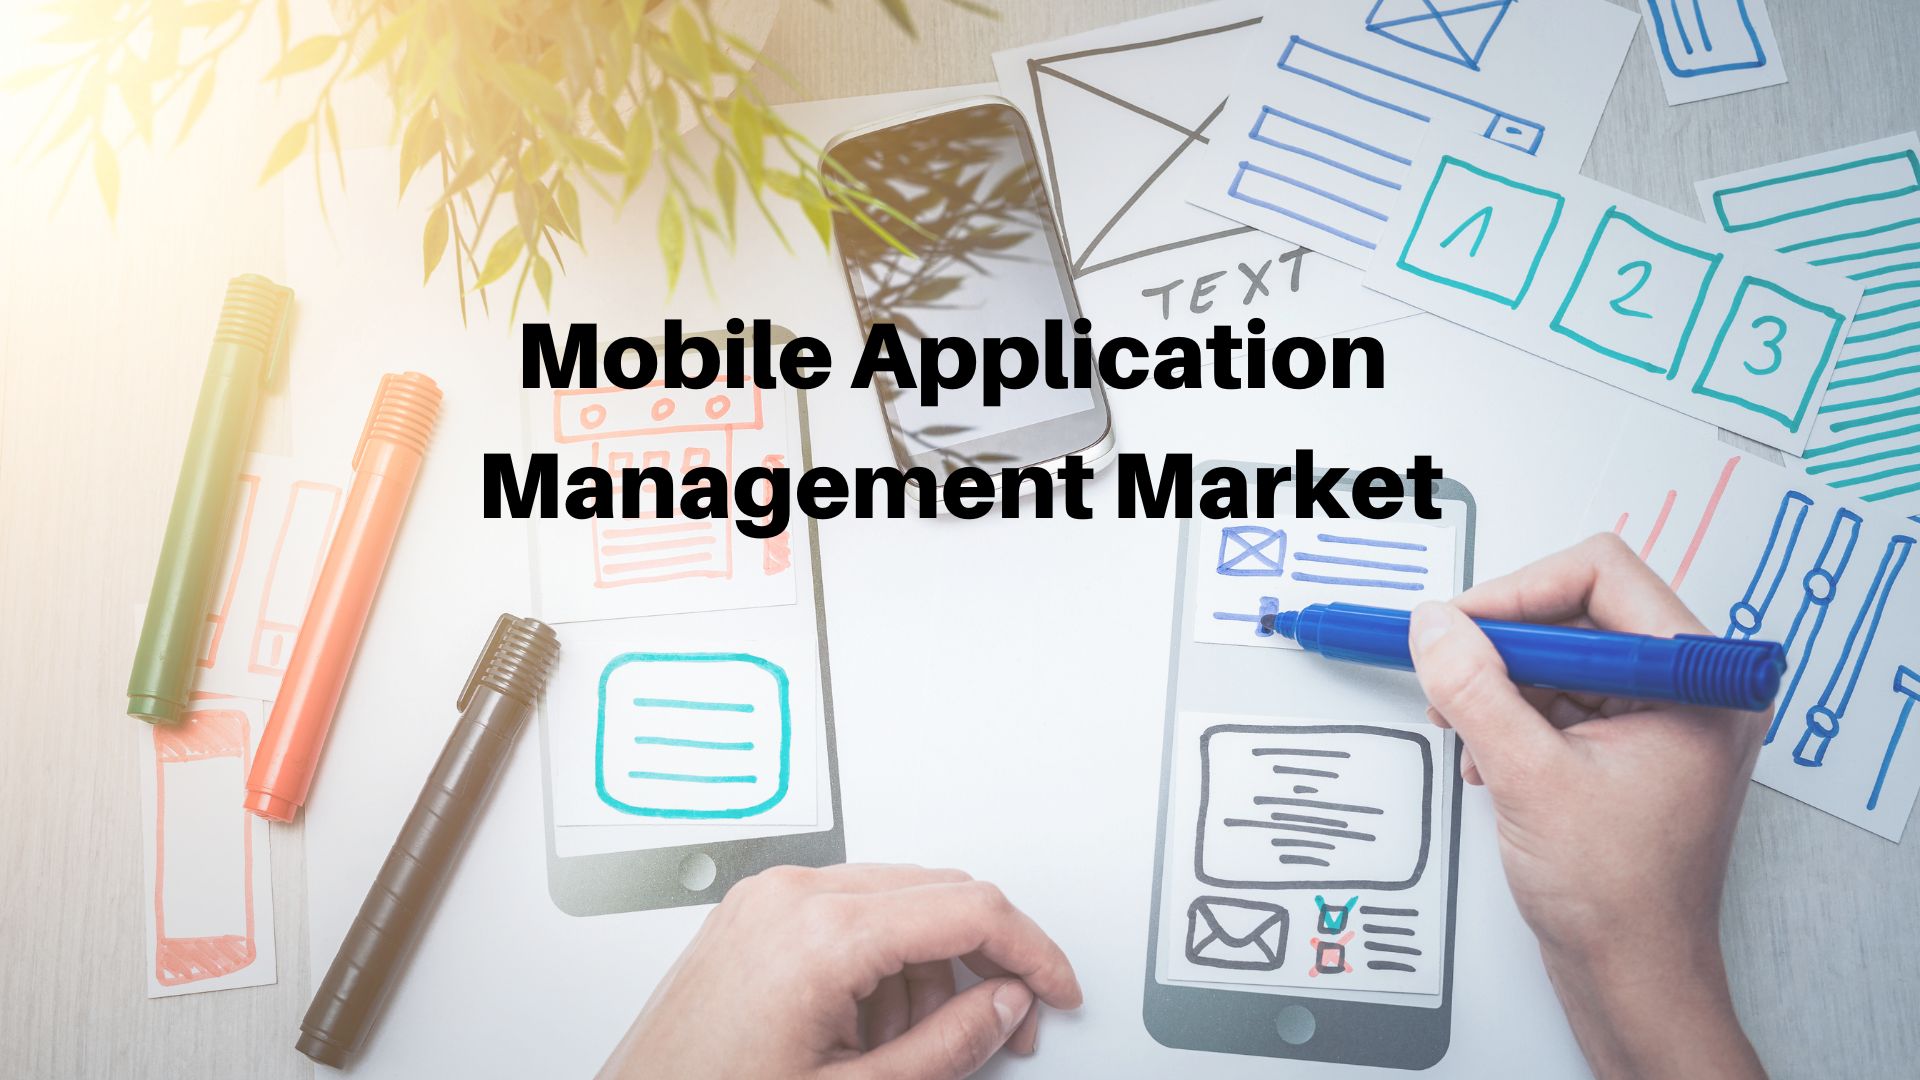 Mobile Application Management Market Size Will Reach USD 203.8 billion by 2032